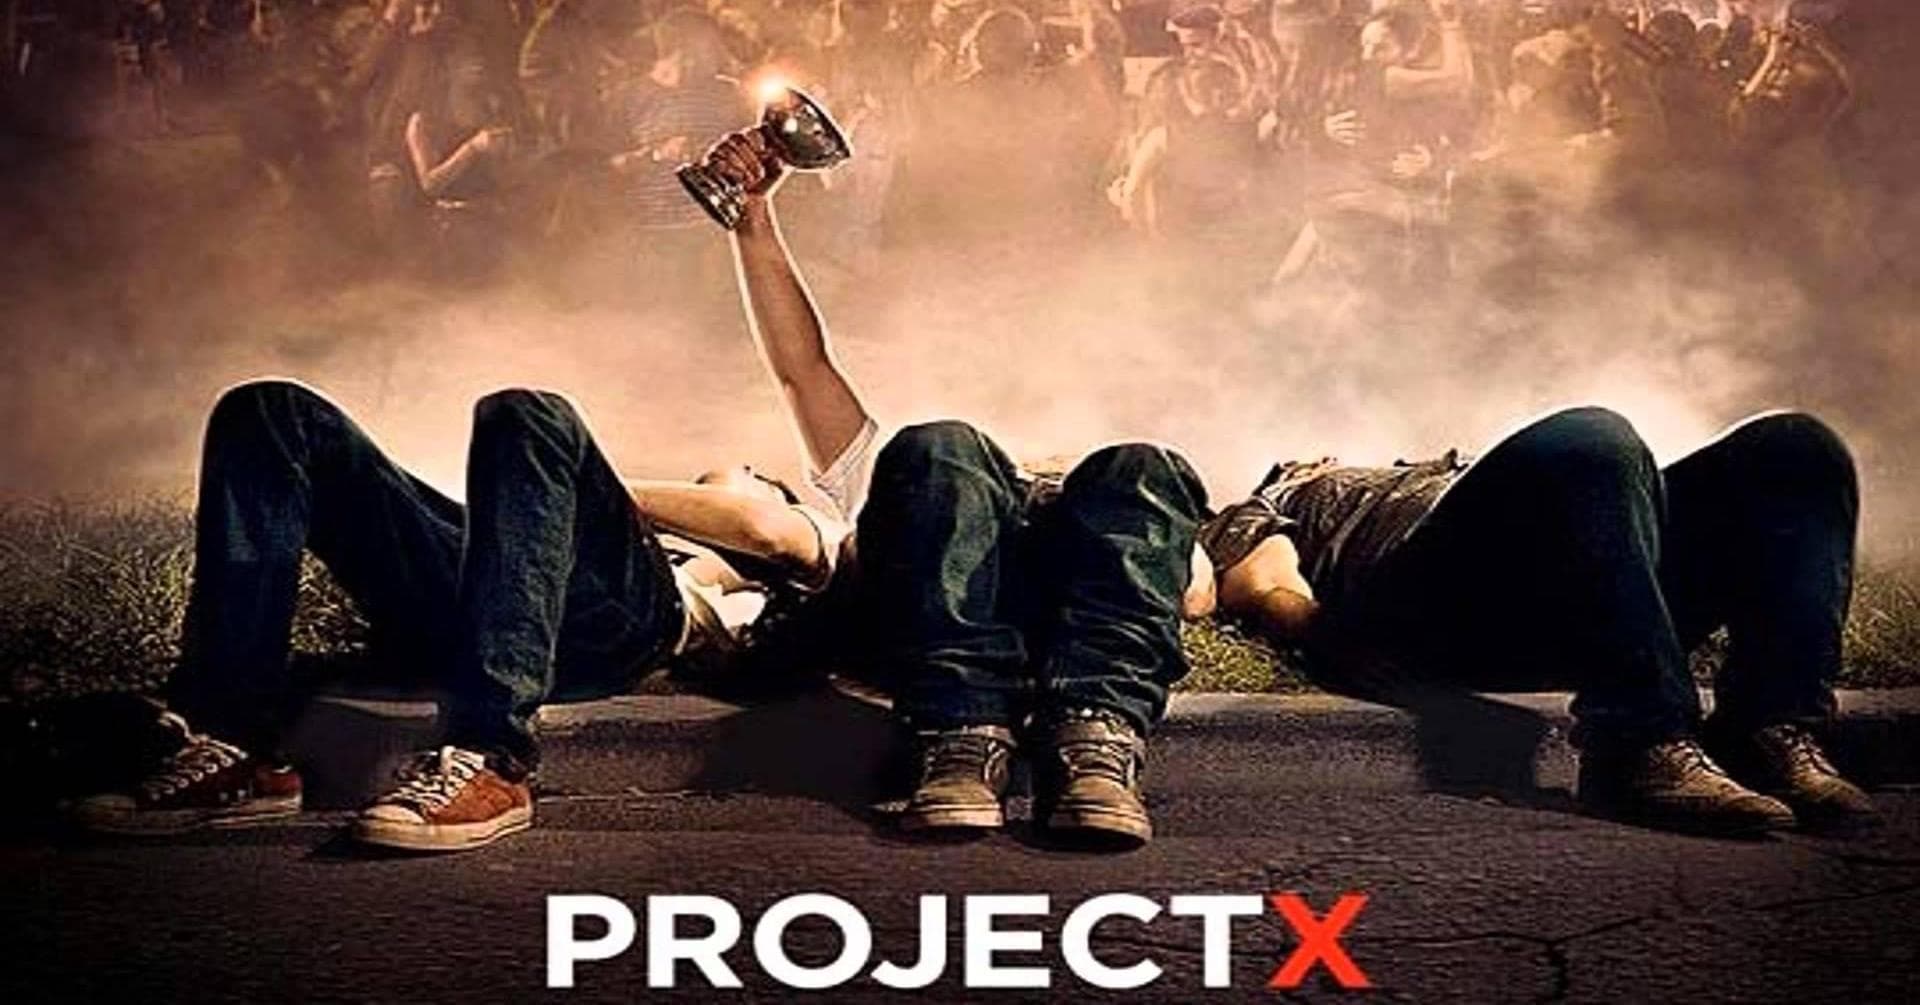 Best Project X Quotes List Of Funny Lines Ranked By Fans